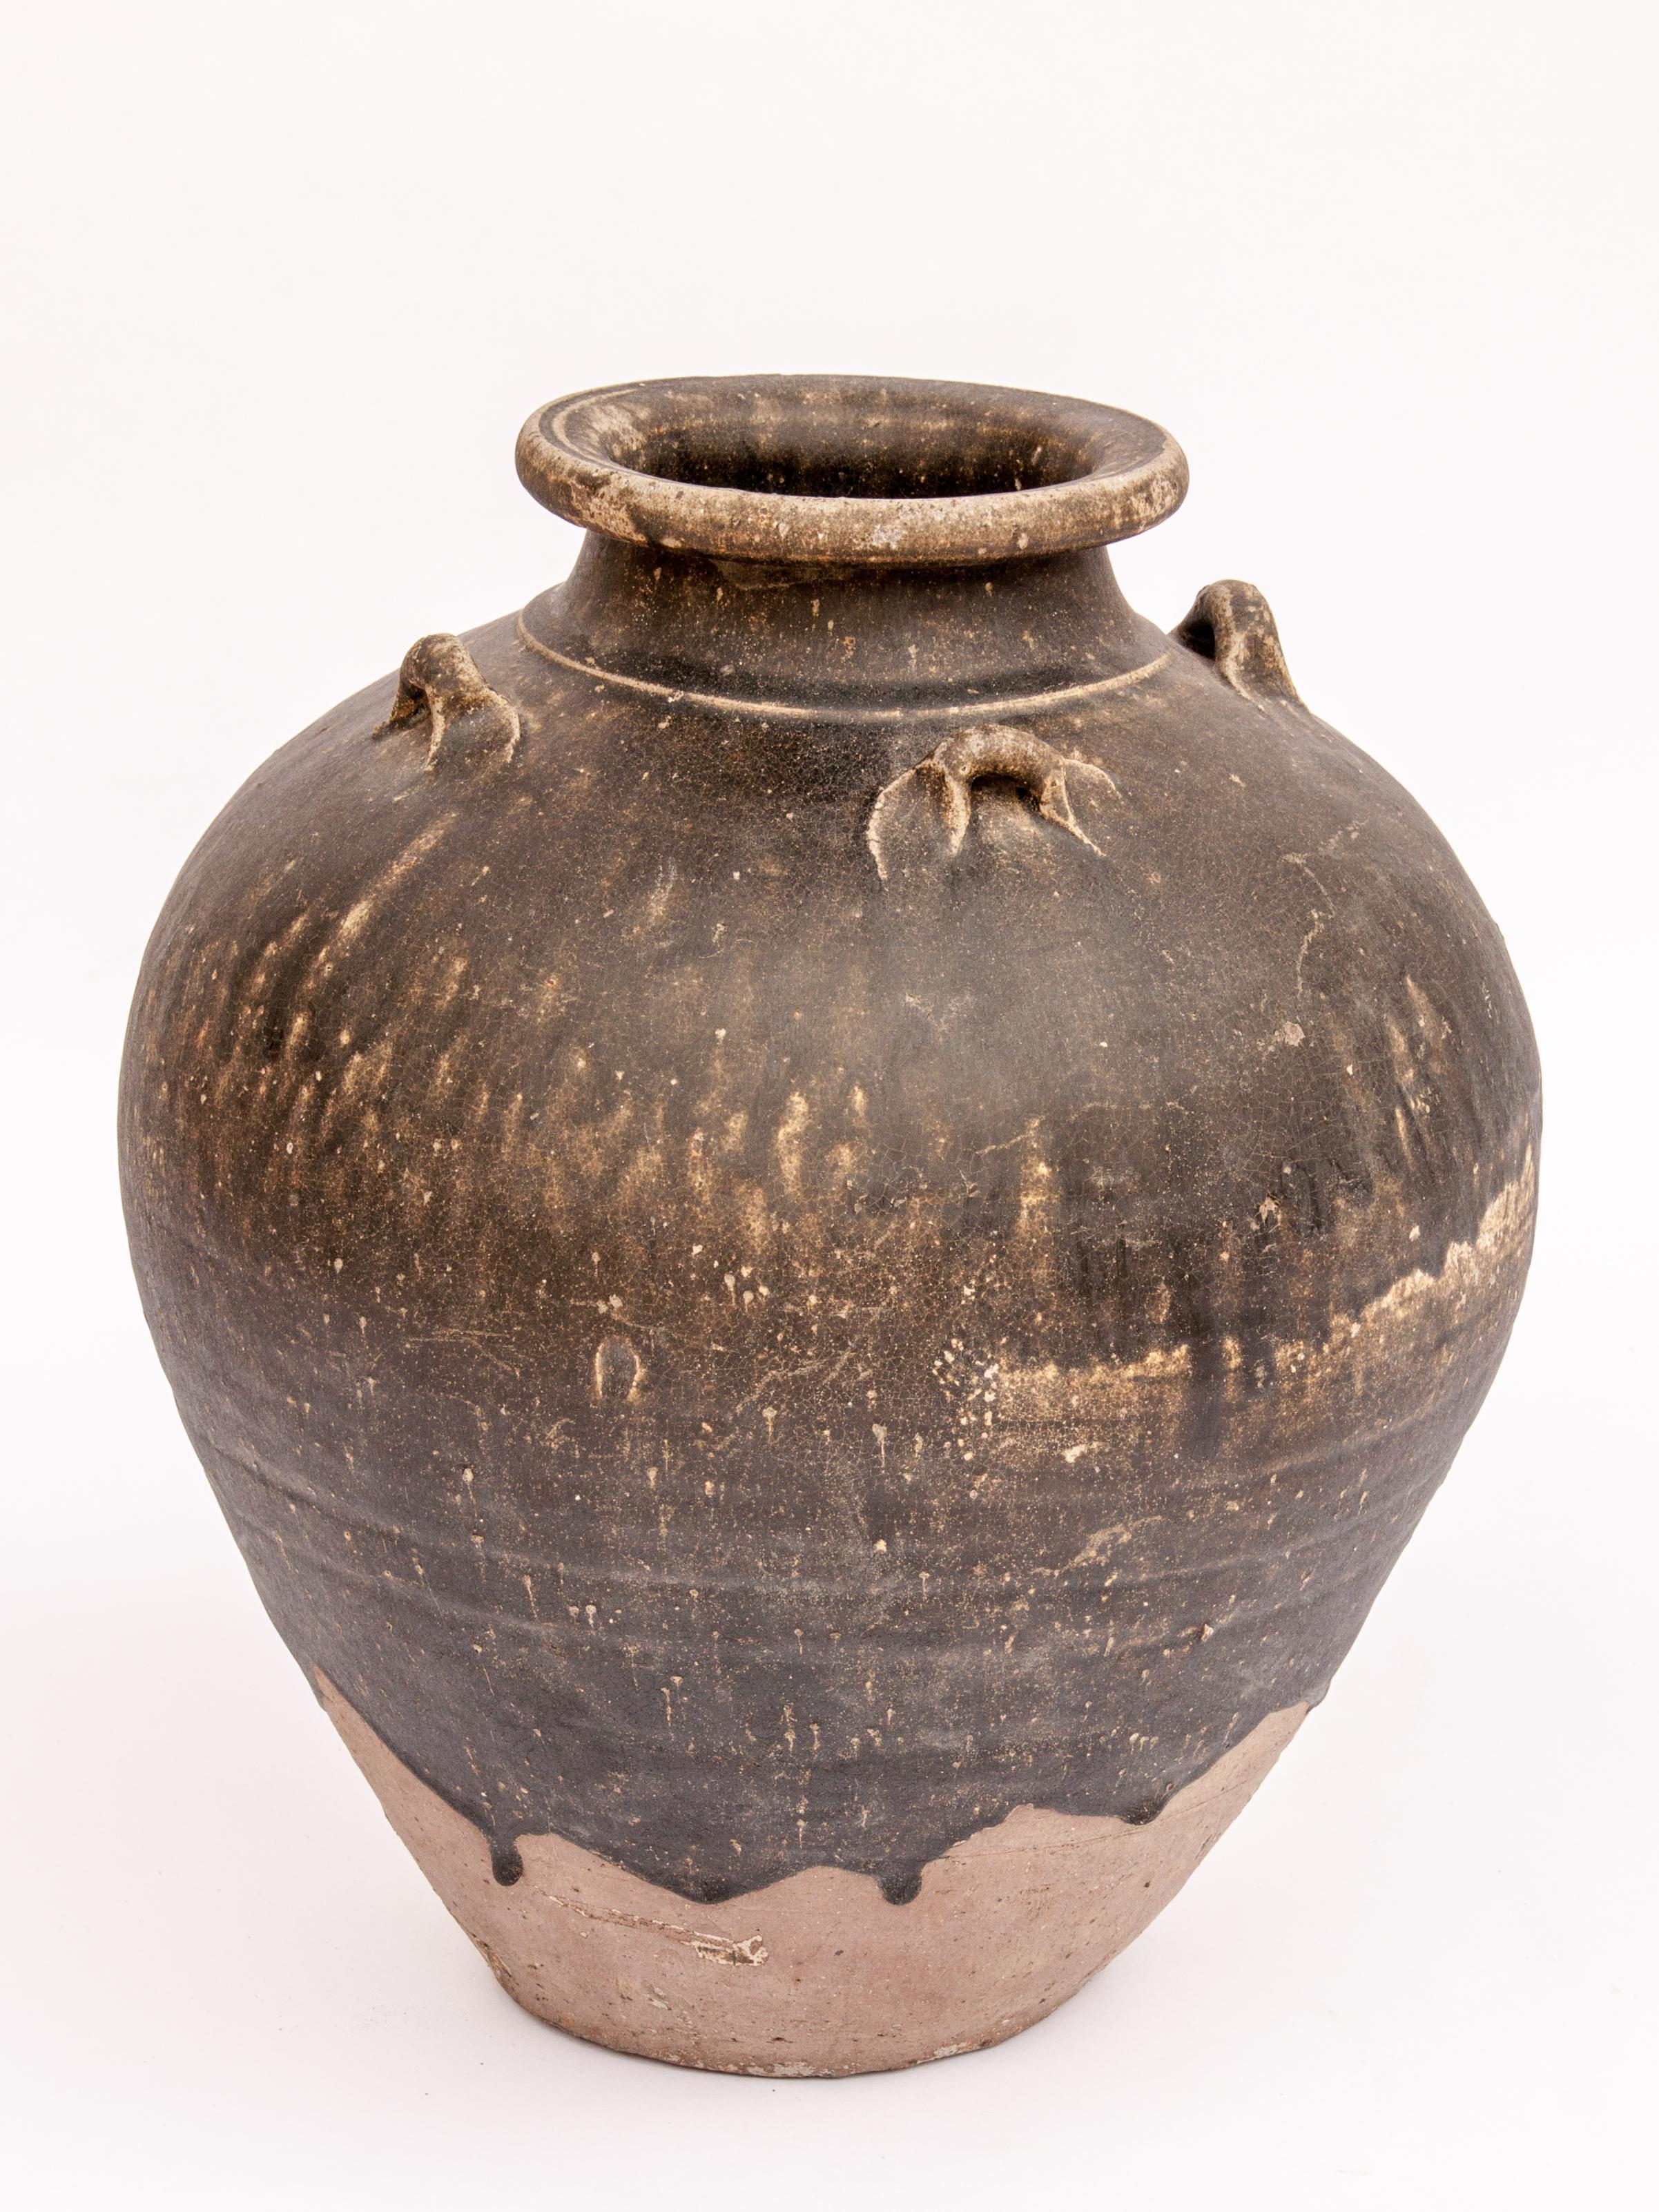 Old Ceramic Jar from North Thailand. 14th - 16th Centuries. 14.75 inches tall.
This jar originates from north Thailand. It is difficult to assign it to a specific kiln, but it is most probably from either one of the Sawankhalok kilns of north /